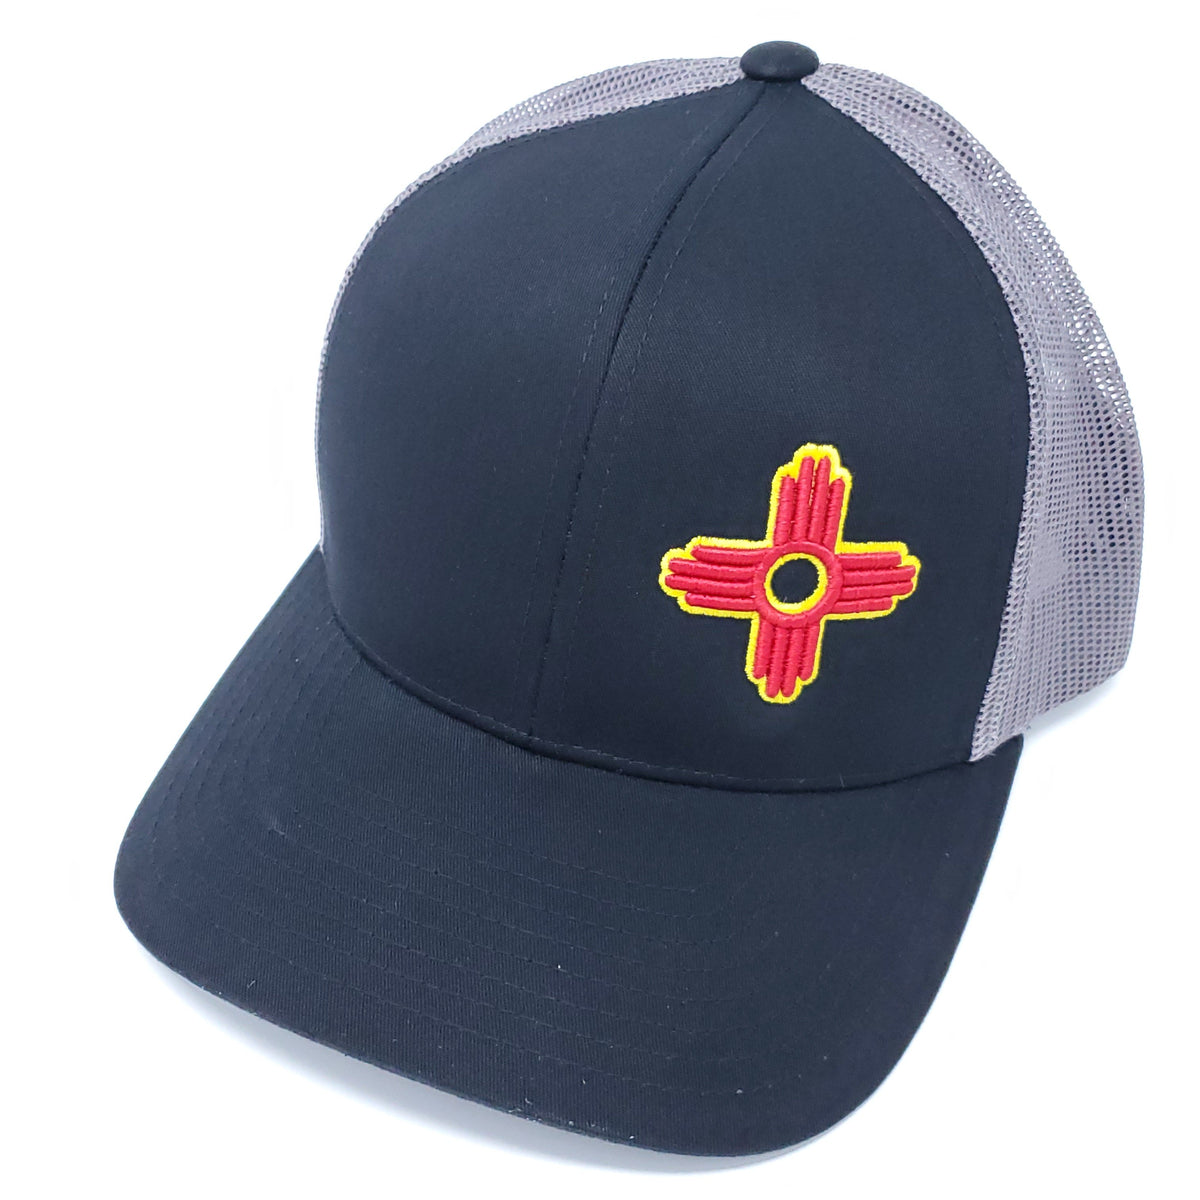 Zia Embroidered Trucker Style Snapback - Ragged Apparel Screen Printing and Signs - www.nmshirts.com